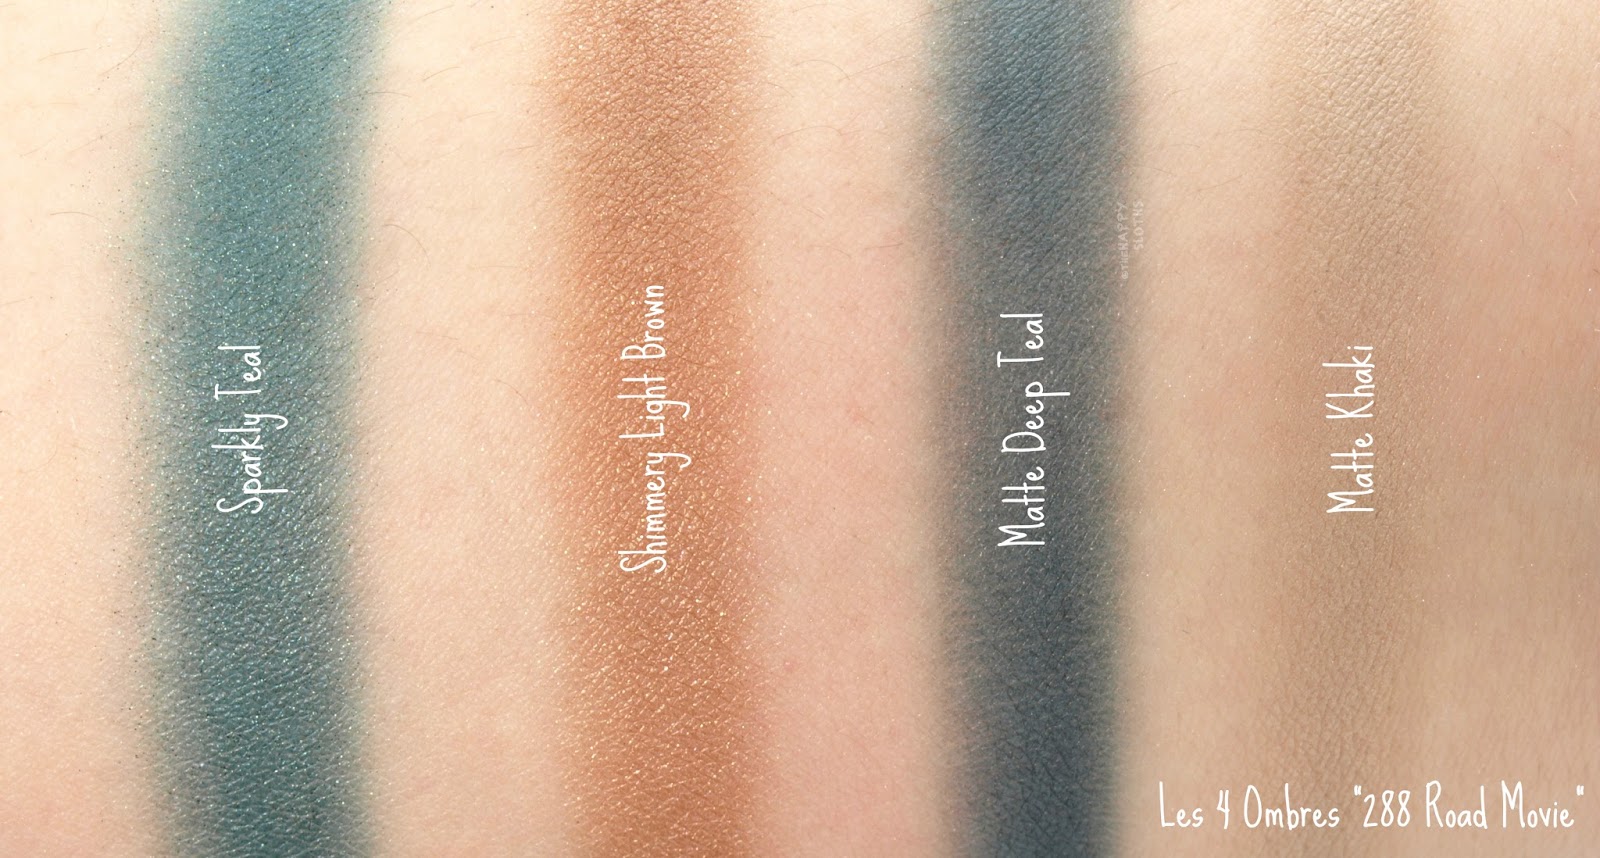 Chanel Les 4 Ombres Palette in "288 Road Movie": Swatches and Review